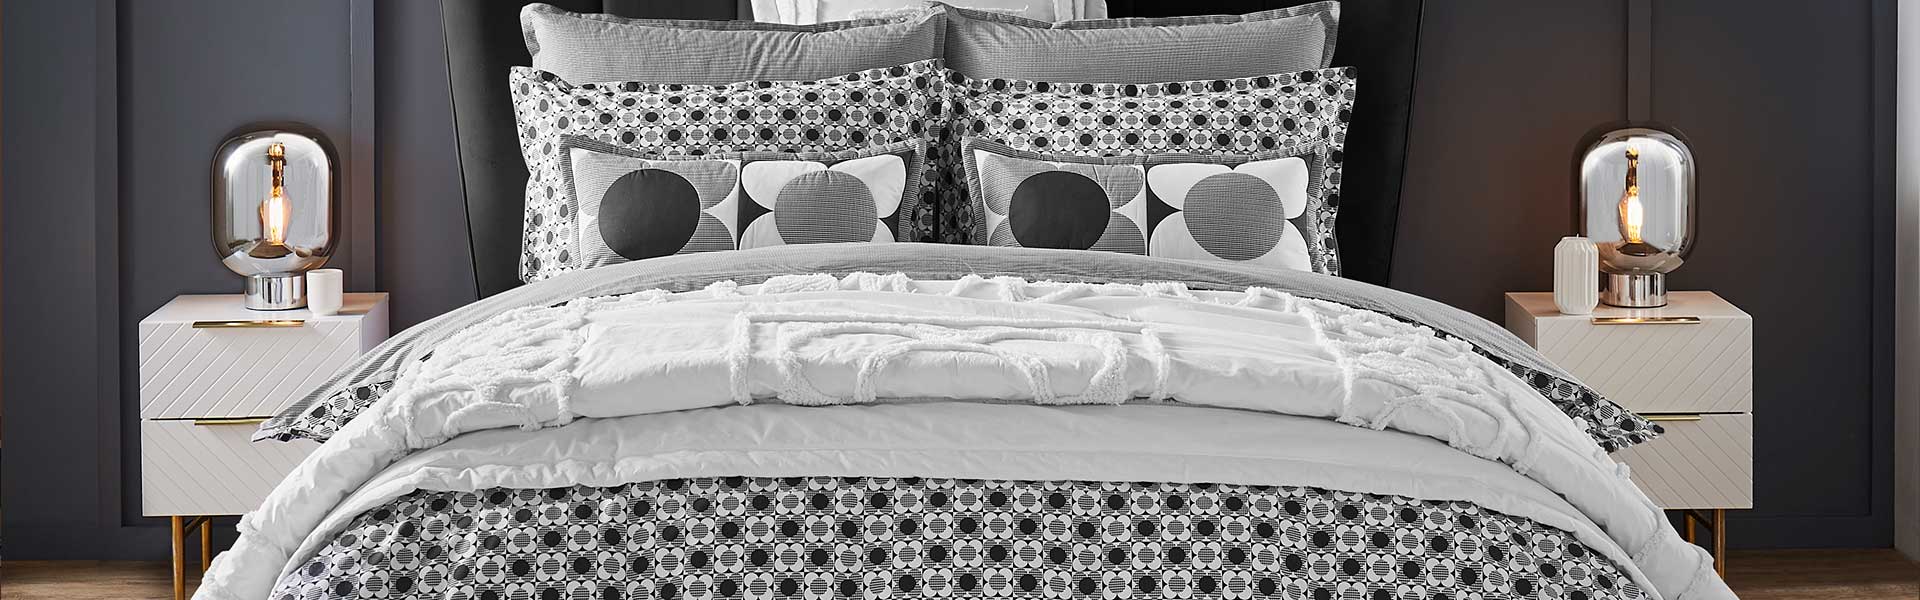 Monochrome bedding on double bed with scatter cushions